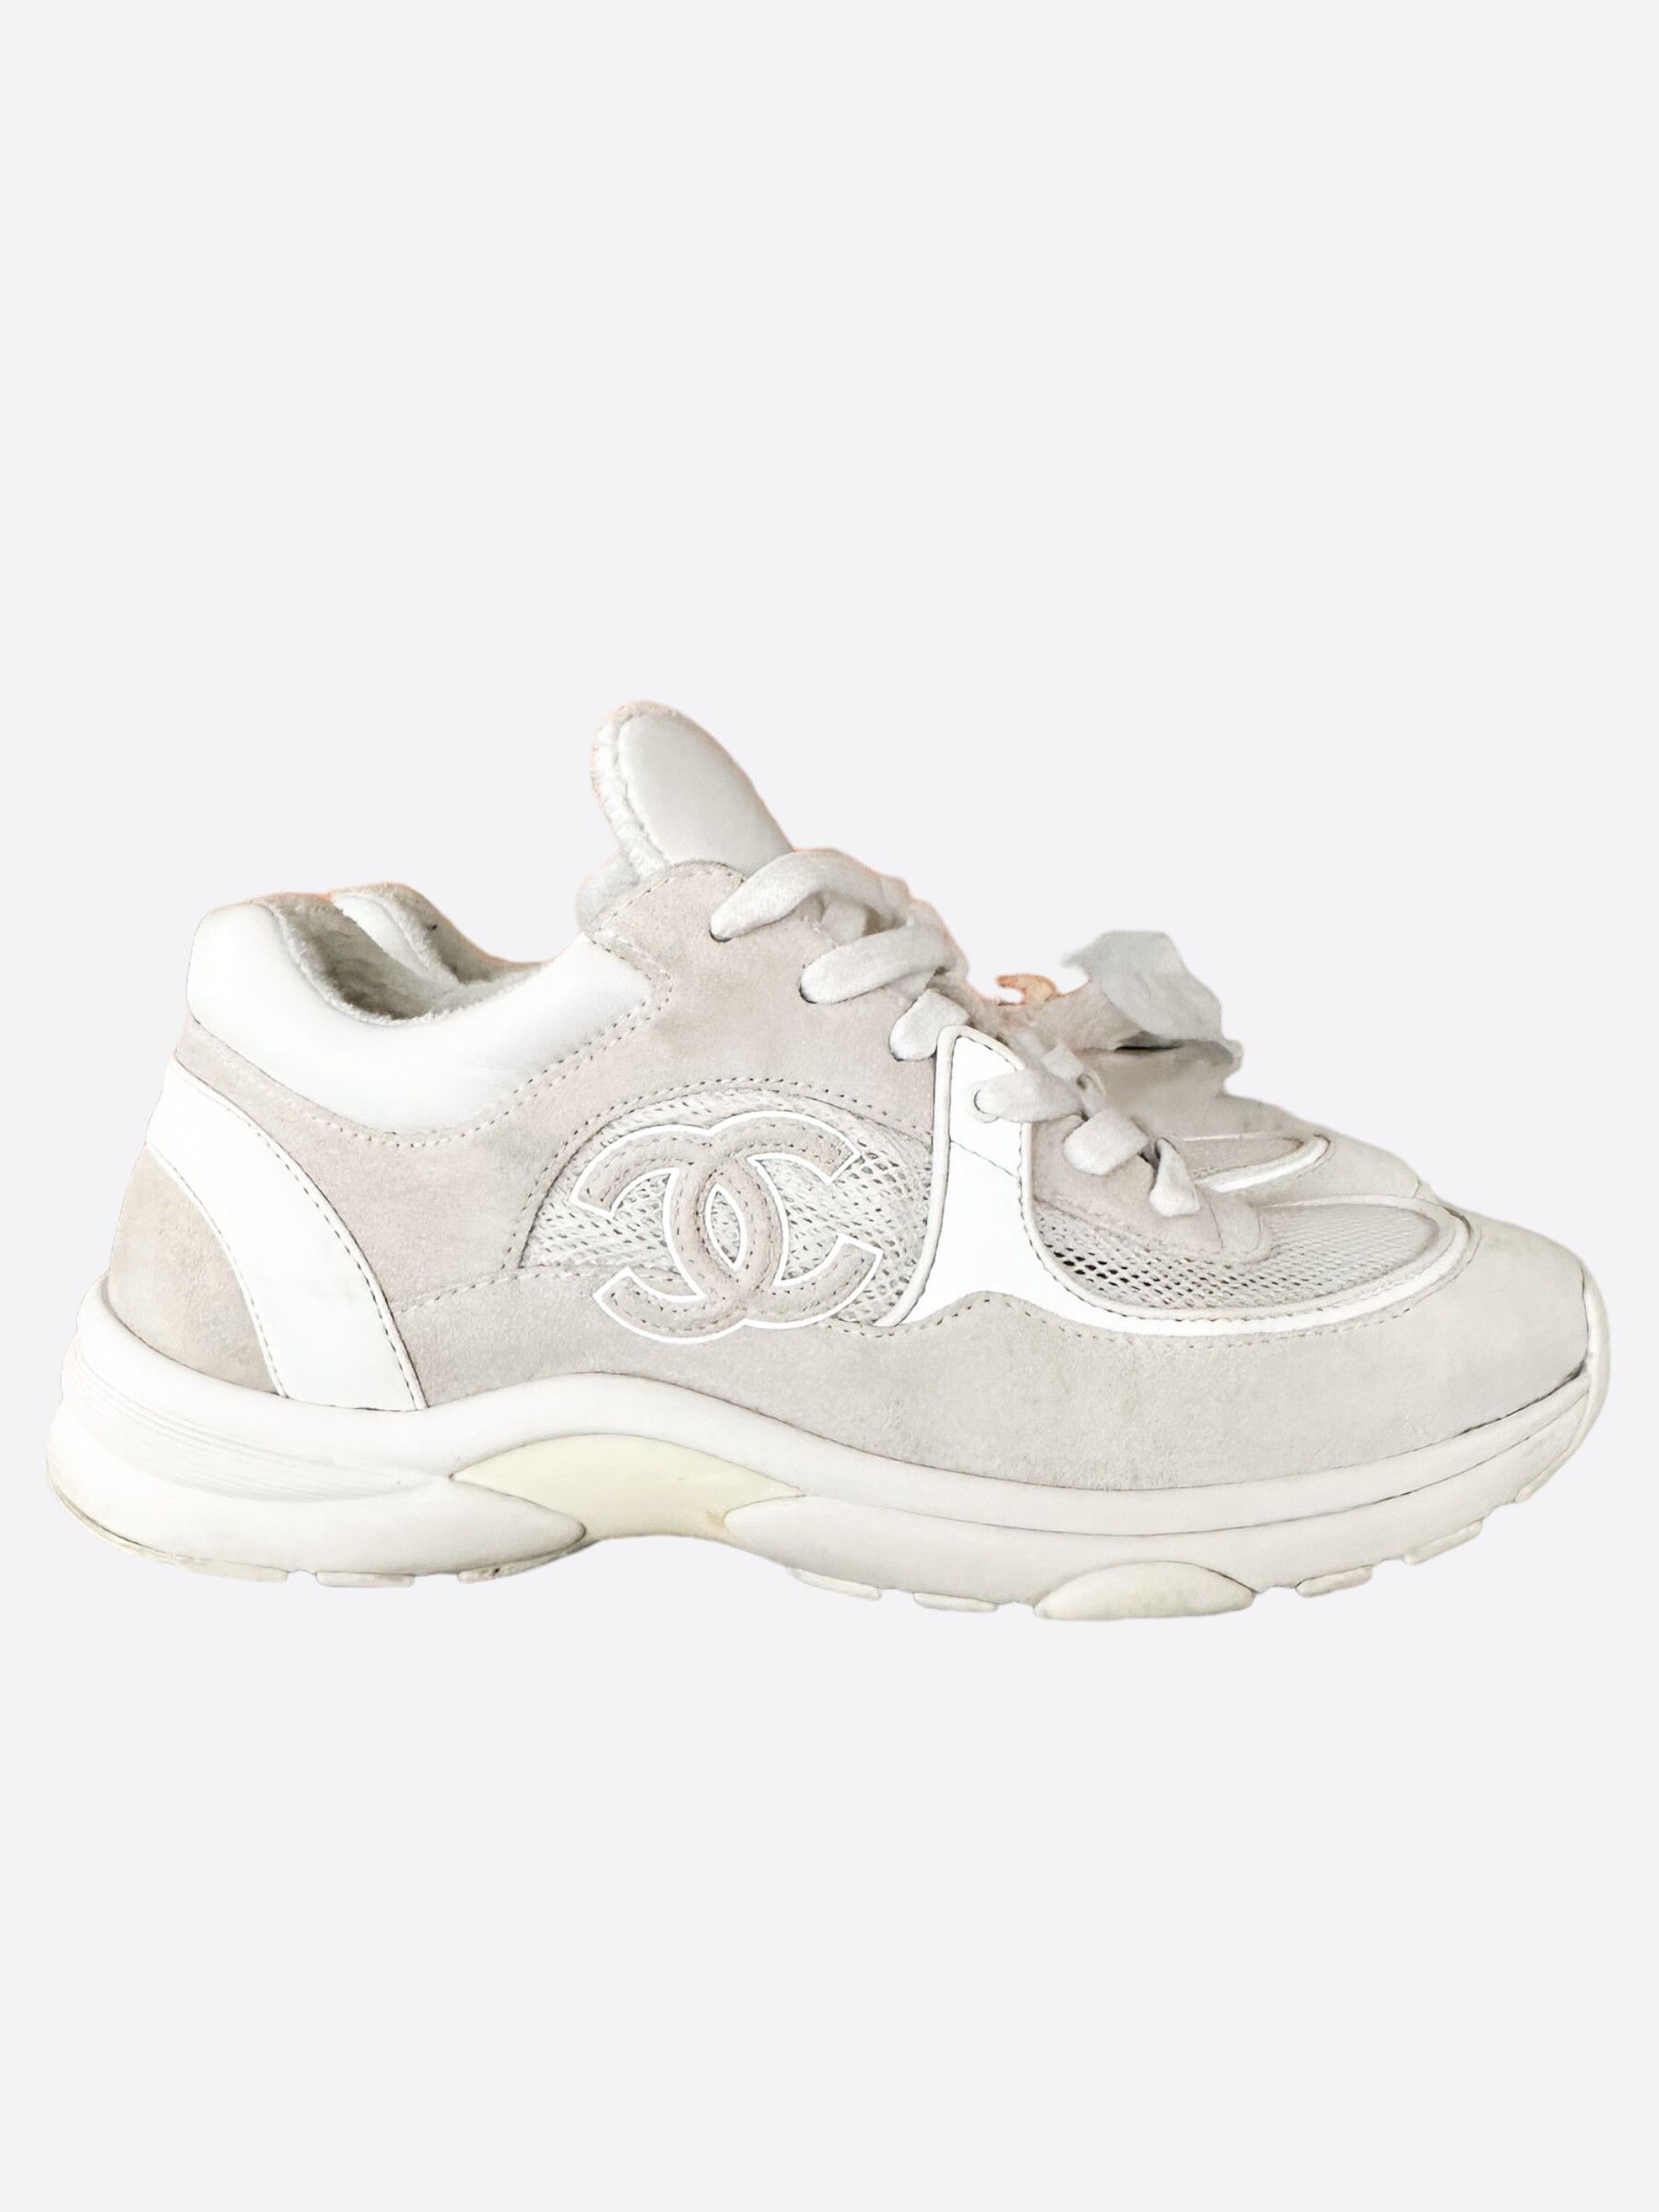 Pre-owned Chanel Grey & White Cc Mesh Trainers Shoes